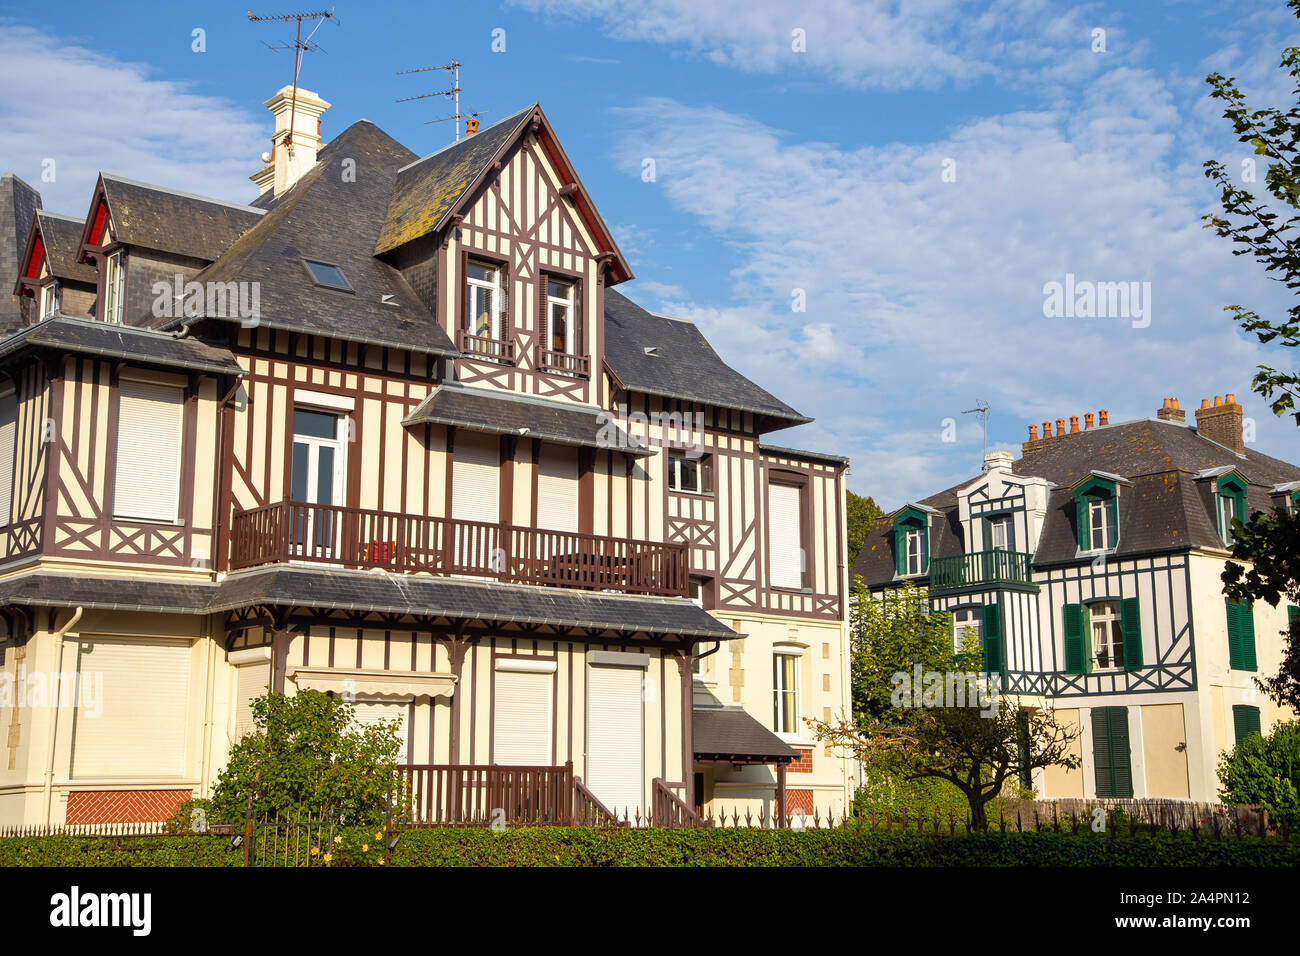 Typical houses and buildings architecture from Deauville, Normandy, France Stock Photo